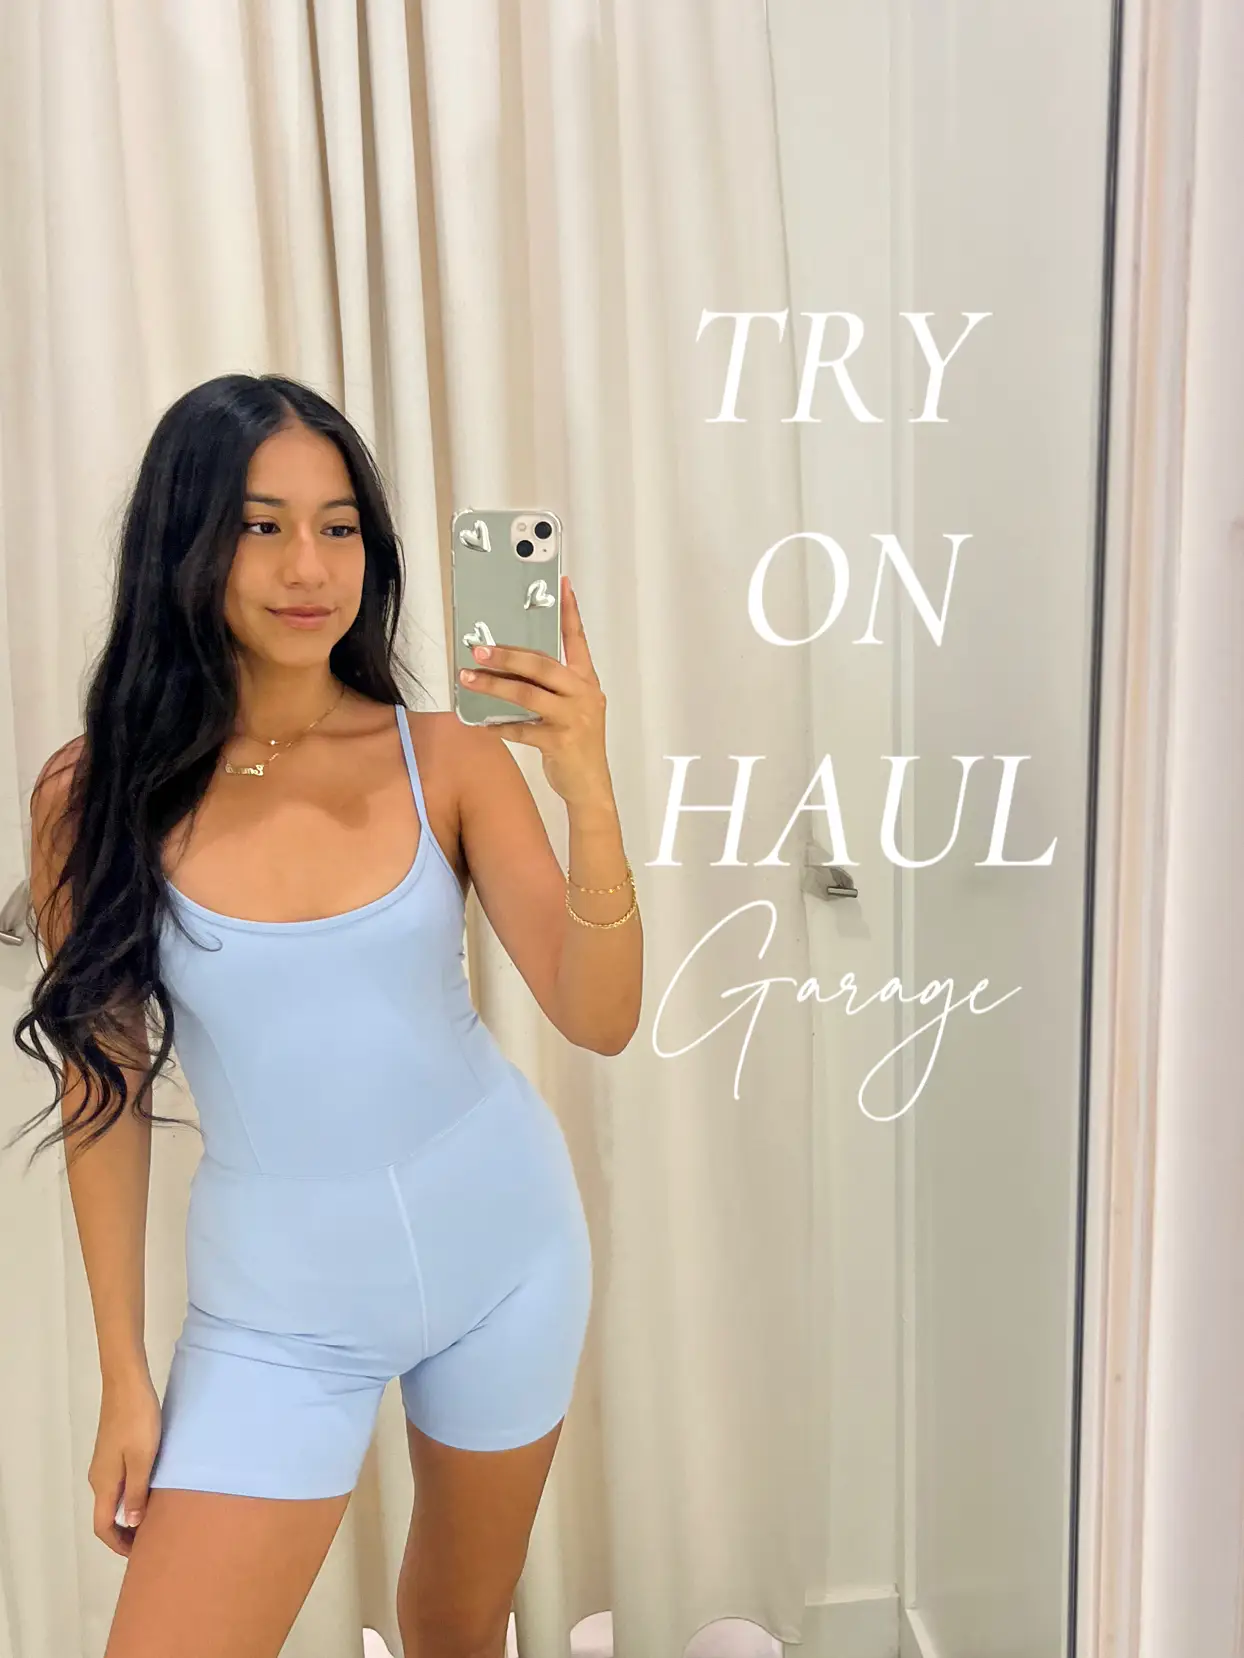 Try on haul! ☁️ | Gallery posted by Em ✨ | Lemon8